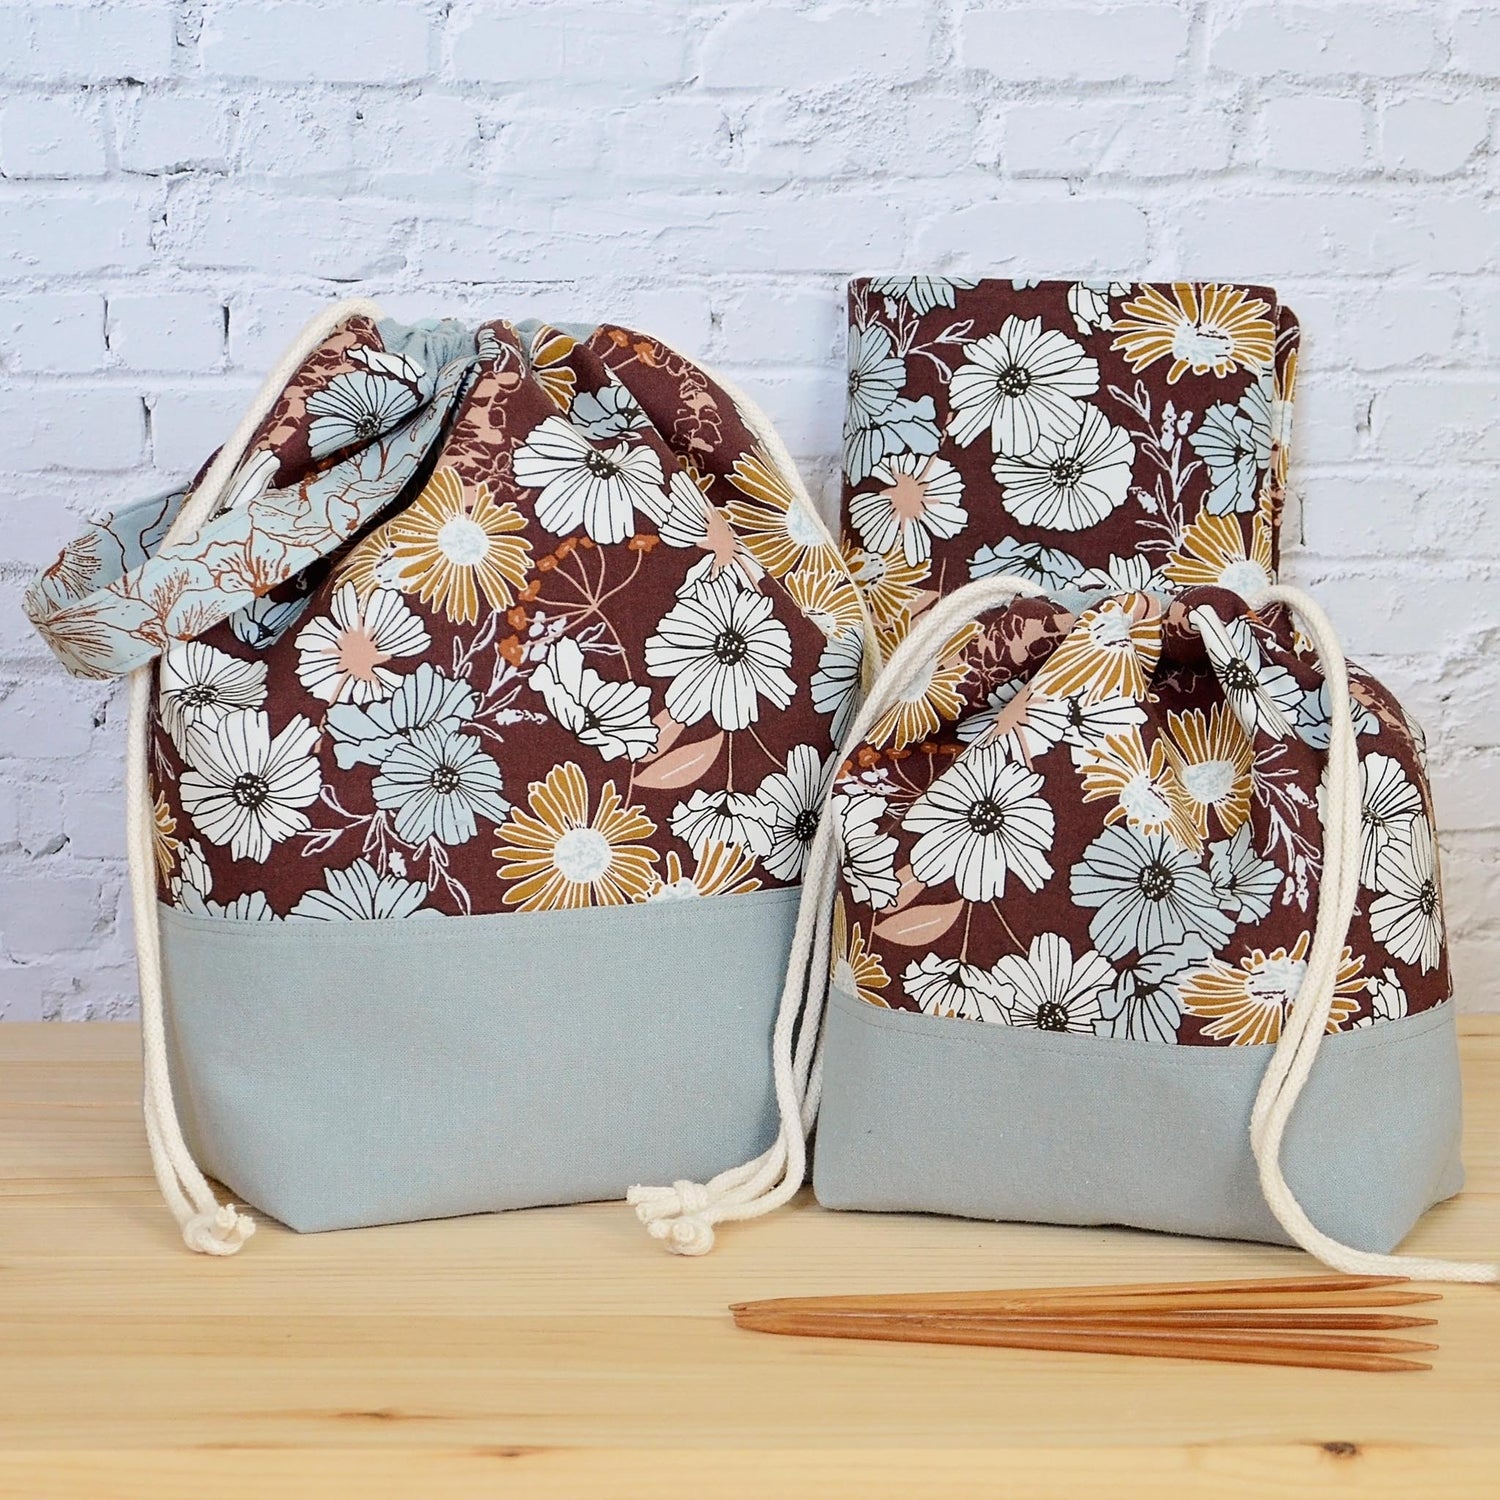 Large knitting bag with pockets and grab handle, made in beautiful floral fabric.  Made by Yellow Petal Handmade in Canada.